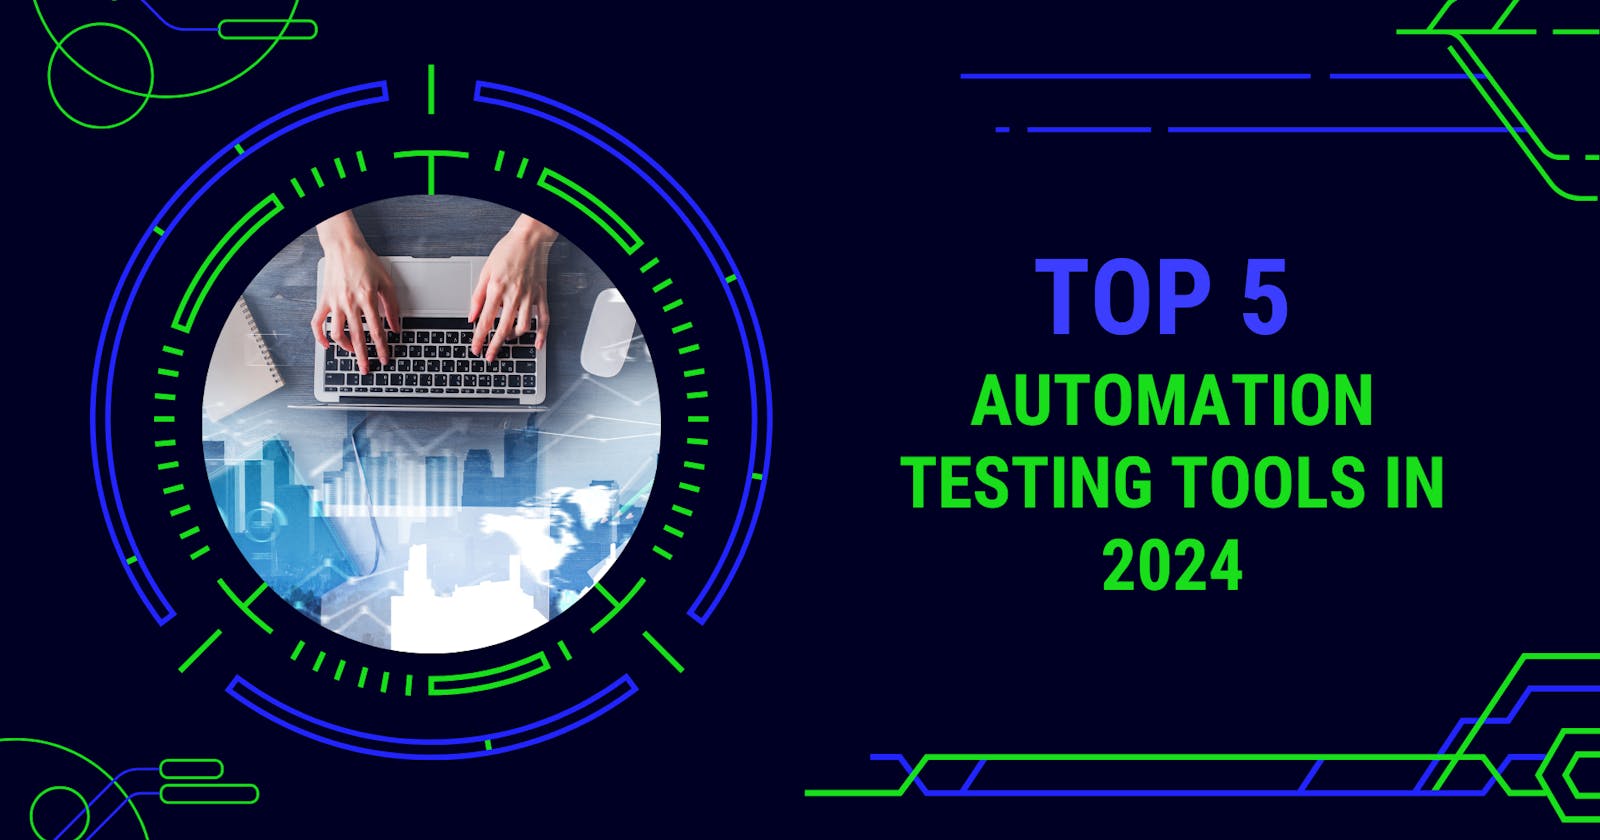 Top 5 Automation Testing Tools In 2024